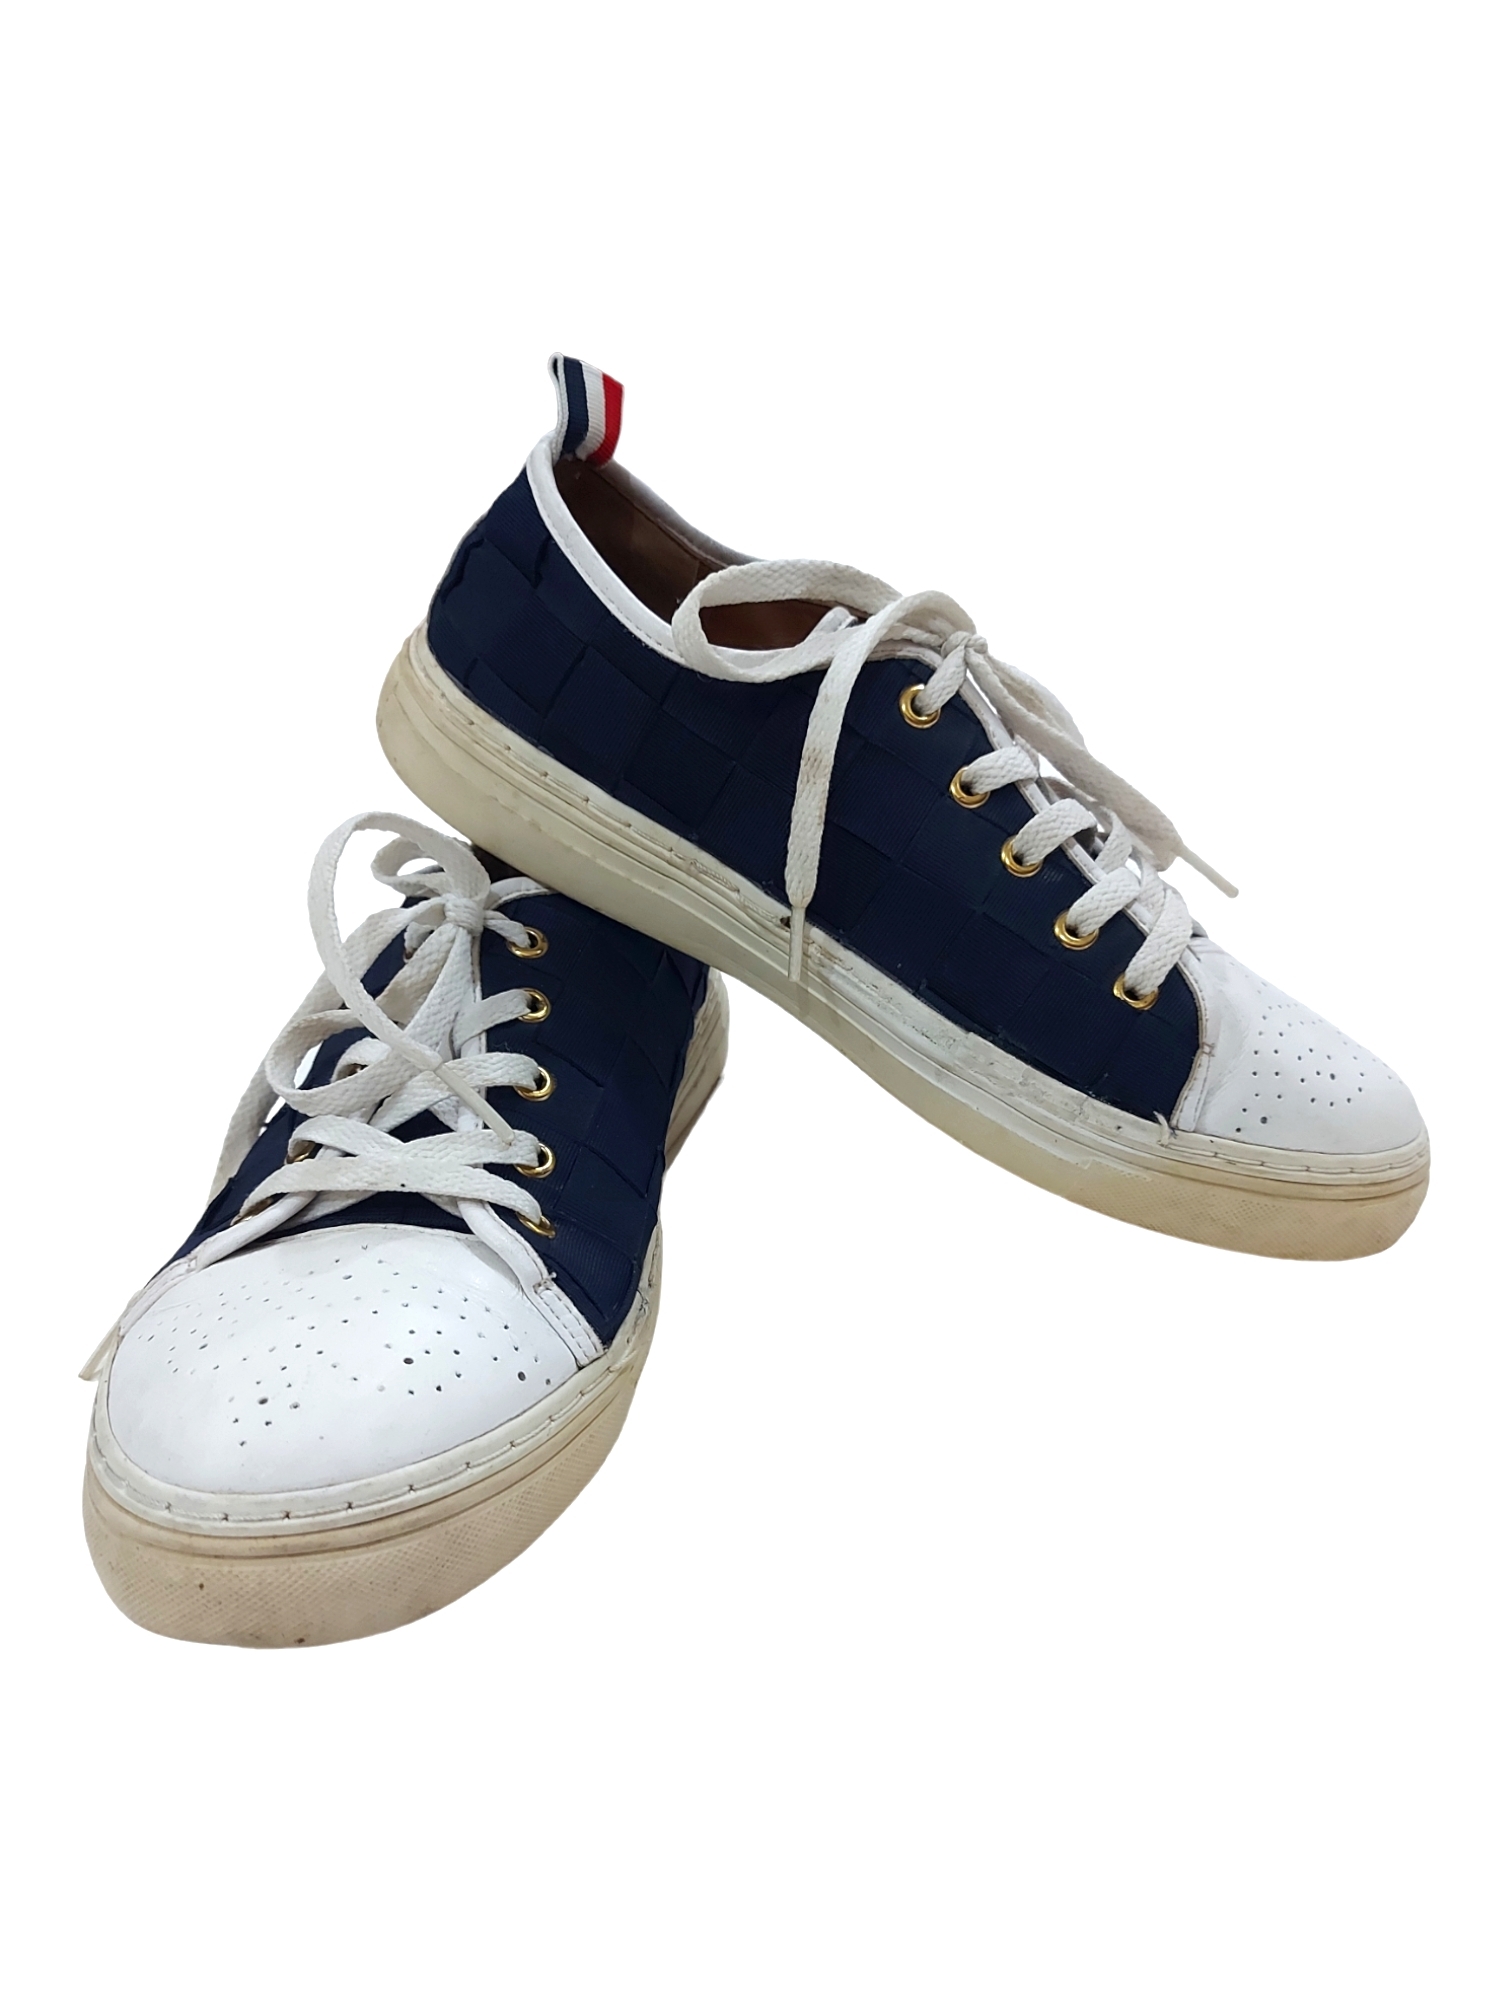 THOM BROWNE WOVEN NAVY SNEAKERS - 2